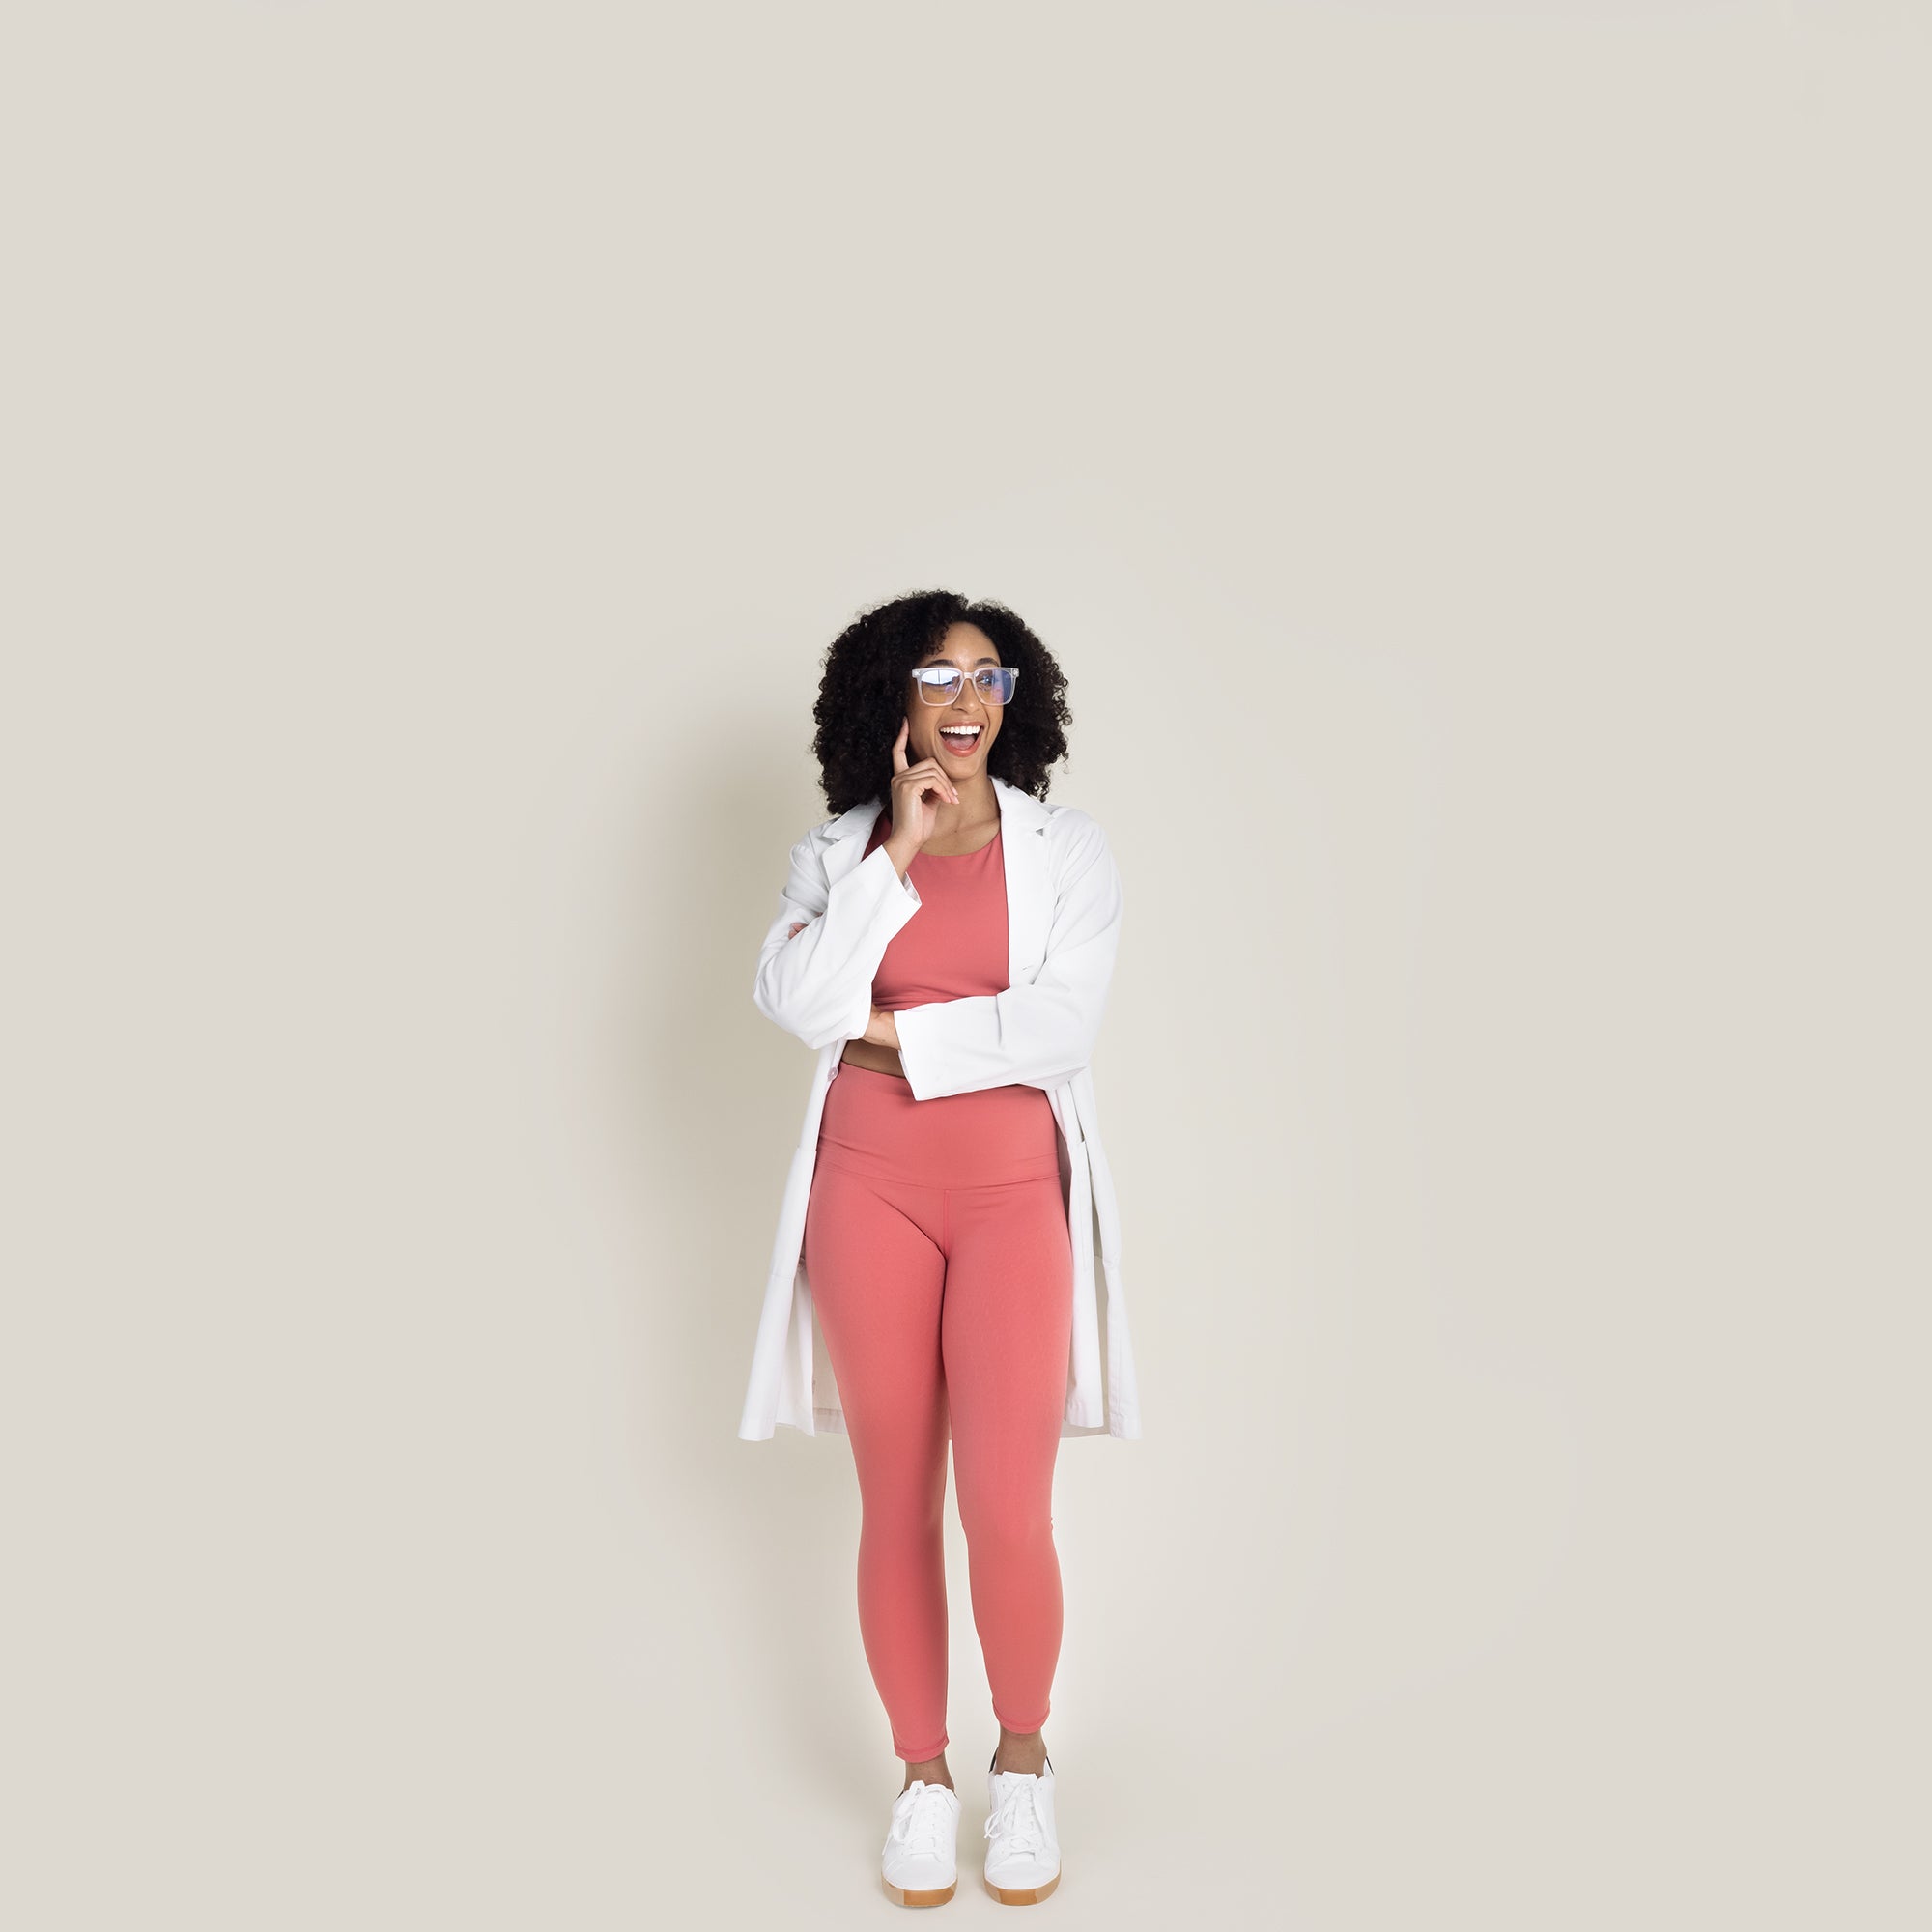 Model posing in Desert Rose compression activewear set wearing white lab coat and glasses